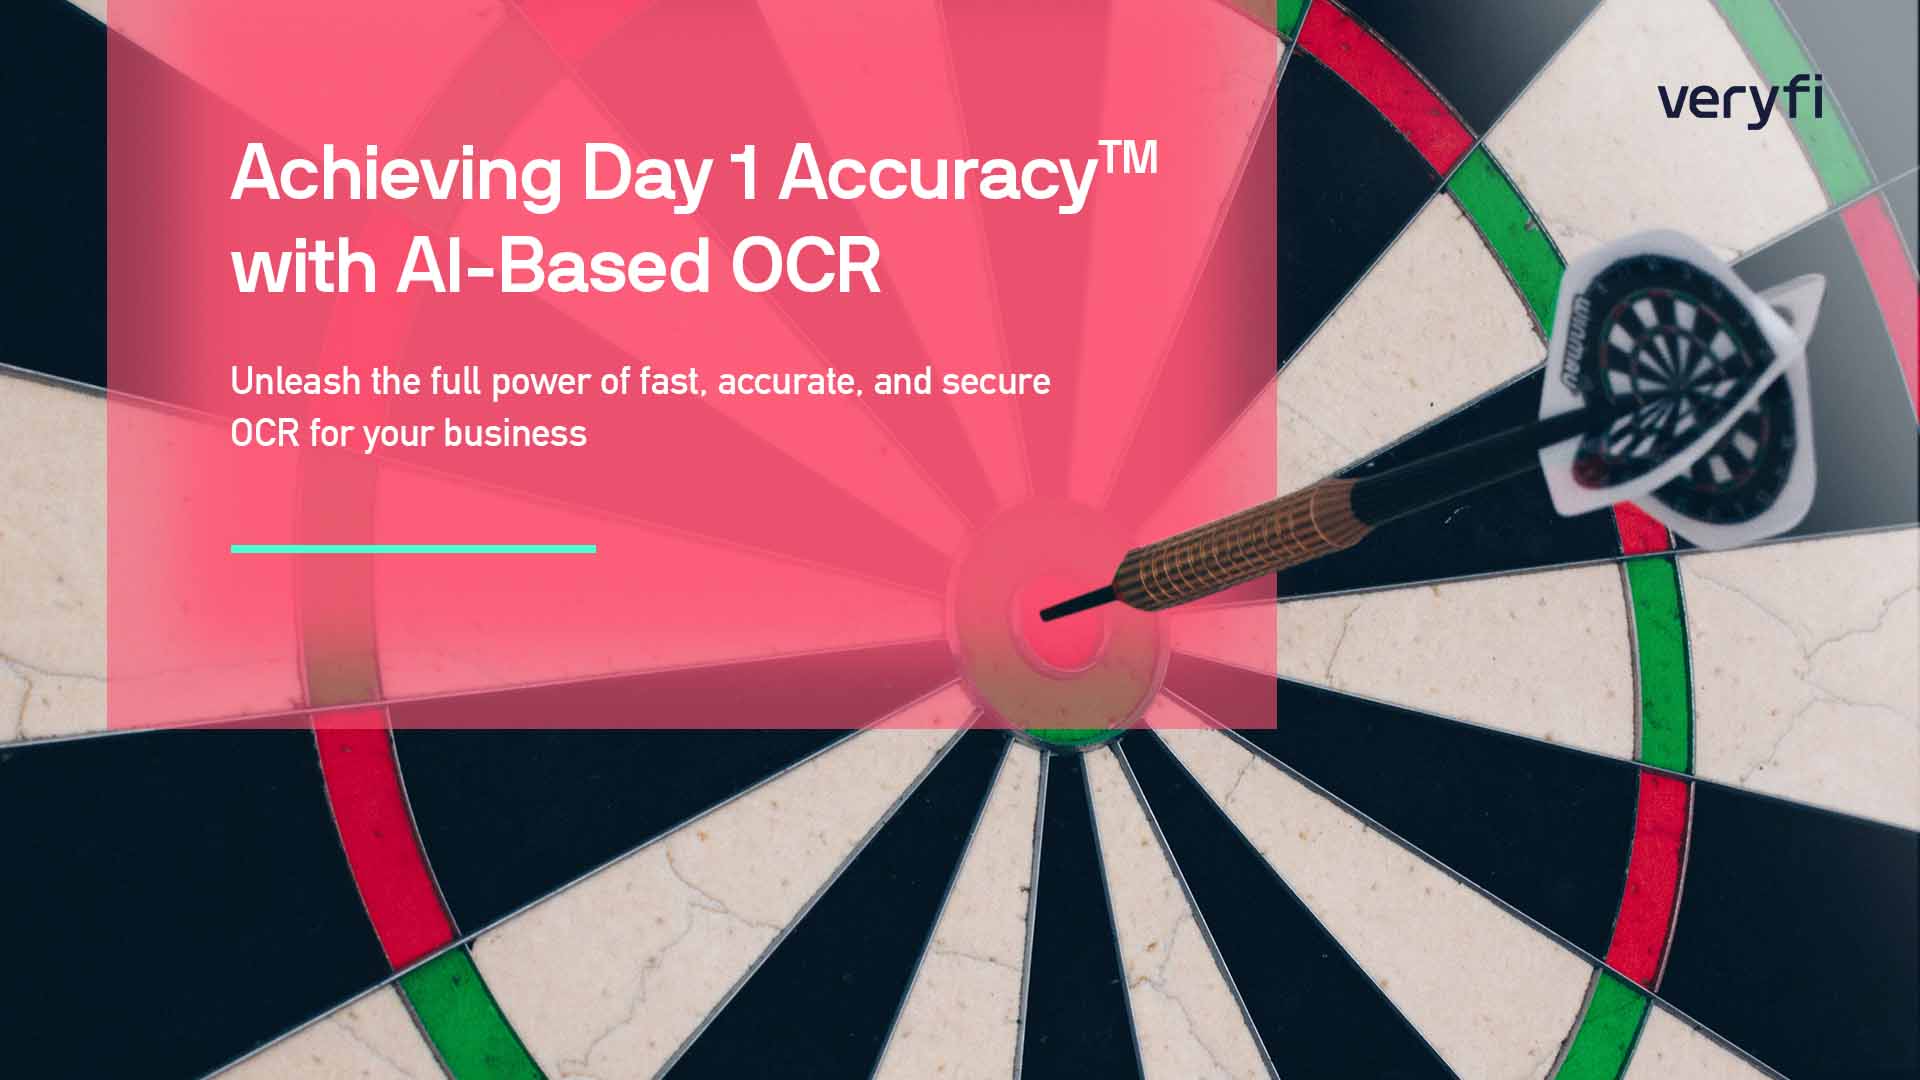 day 1 accuracy represented by a dart board with a bullseye